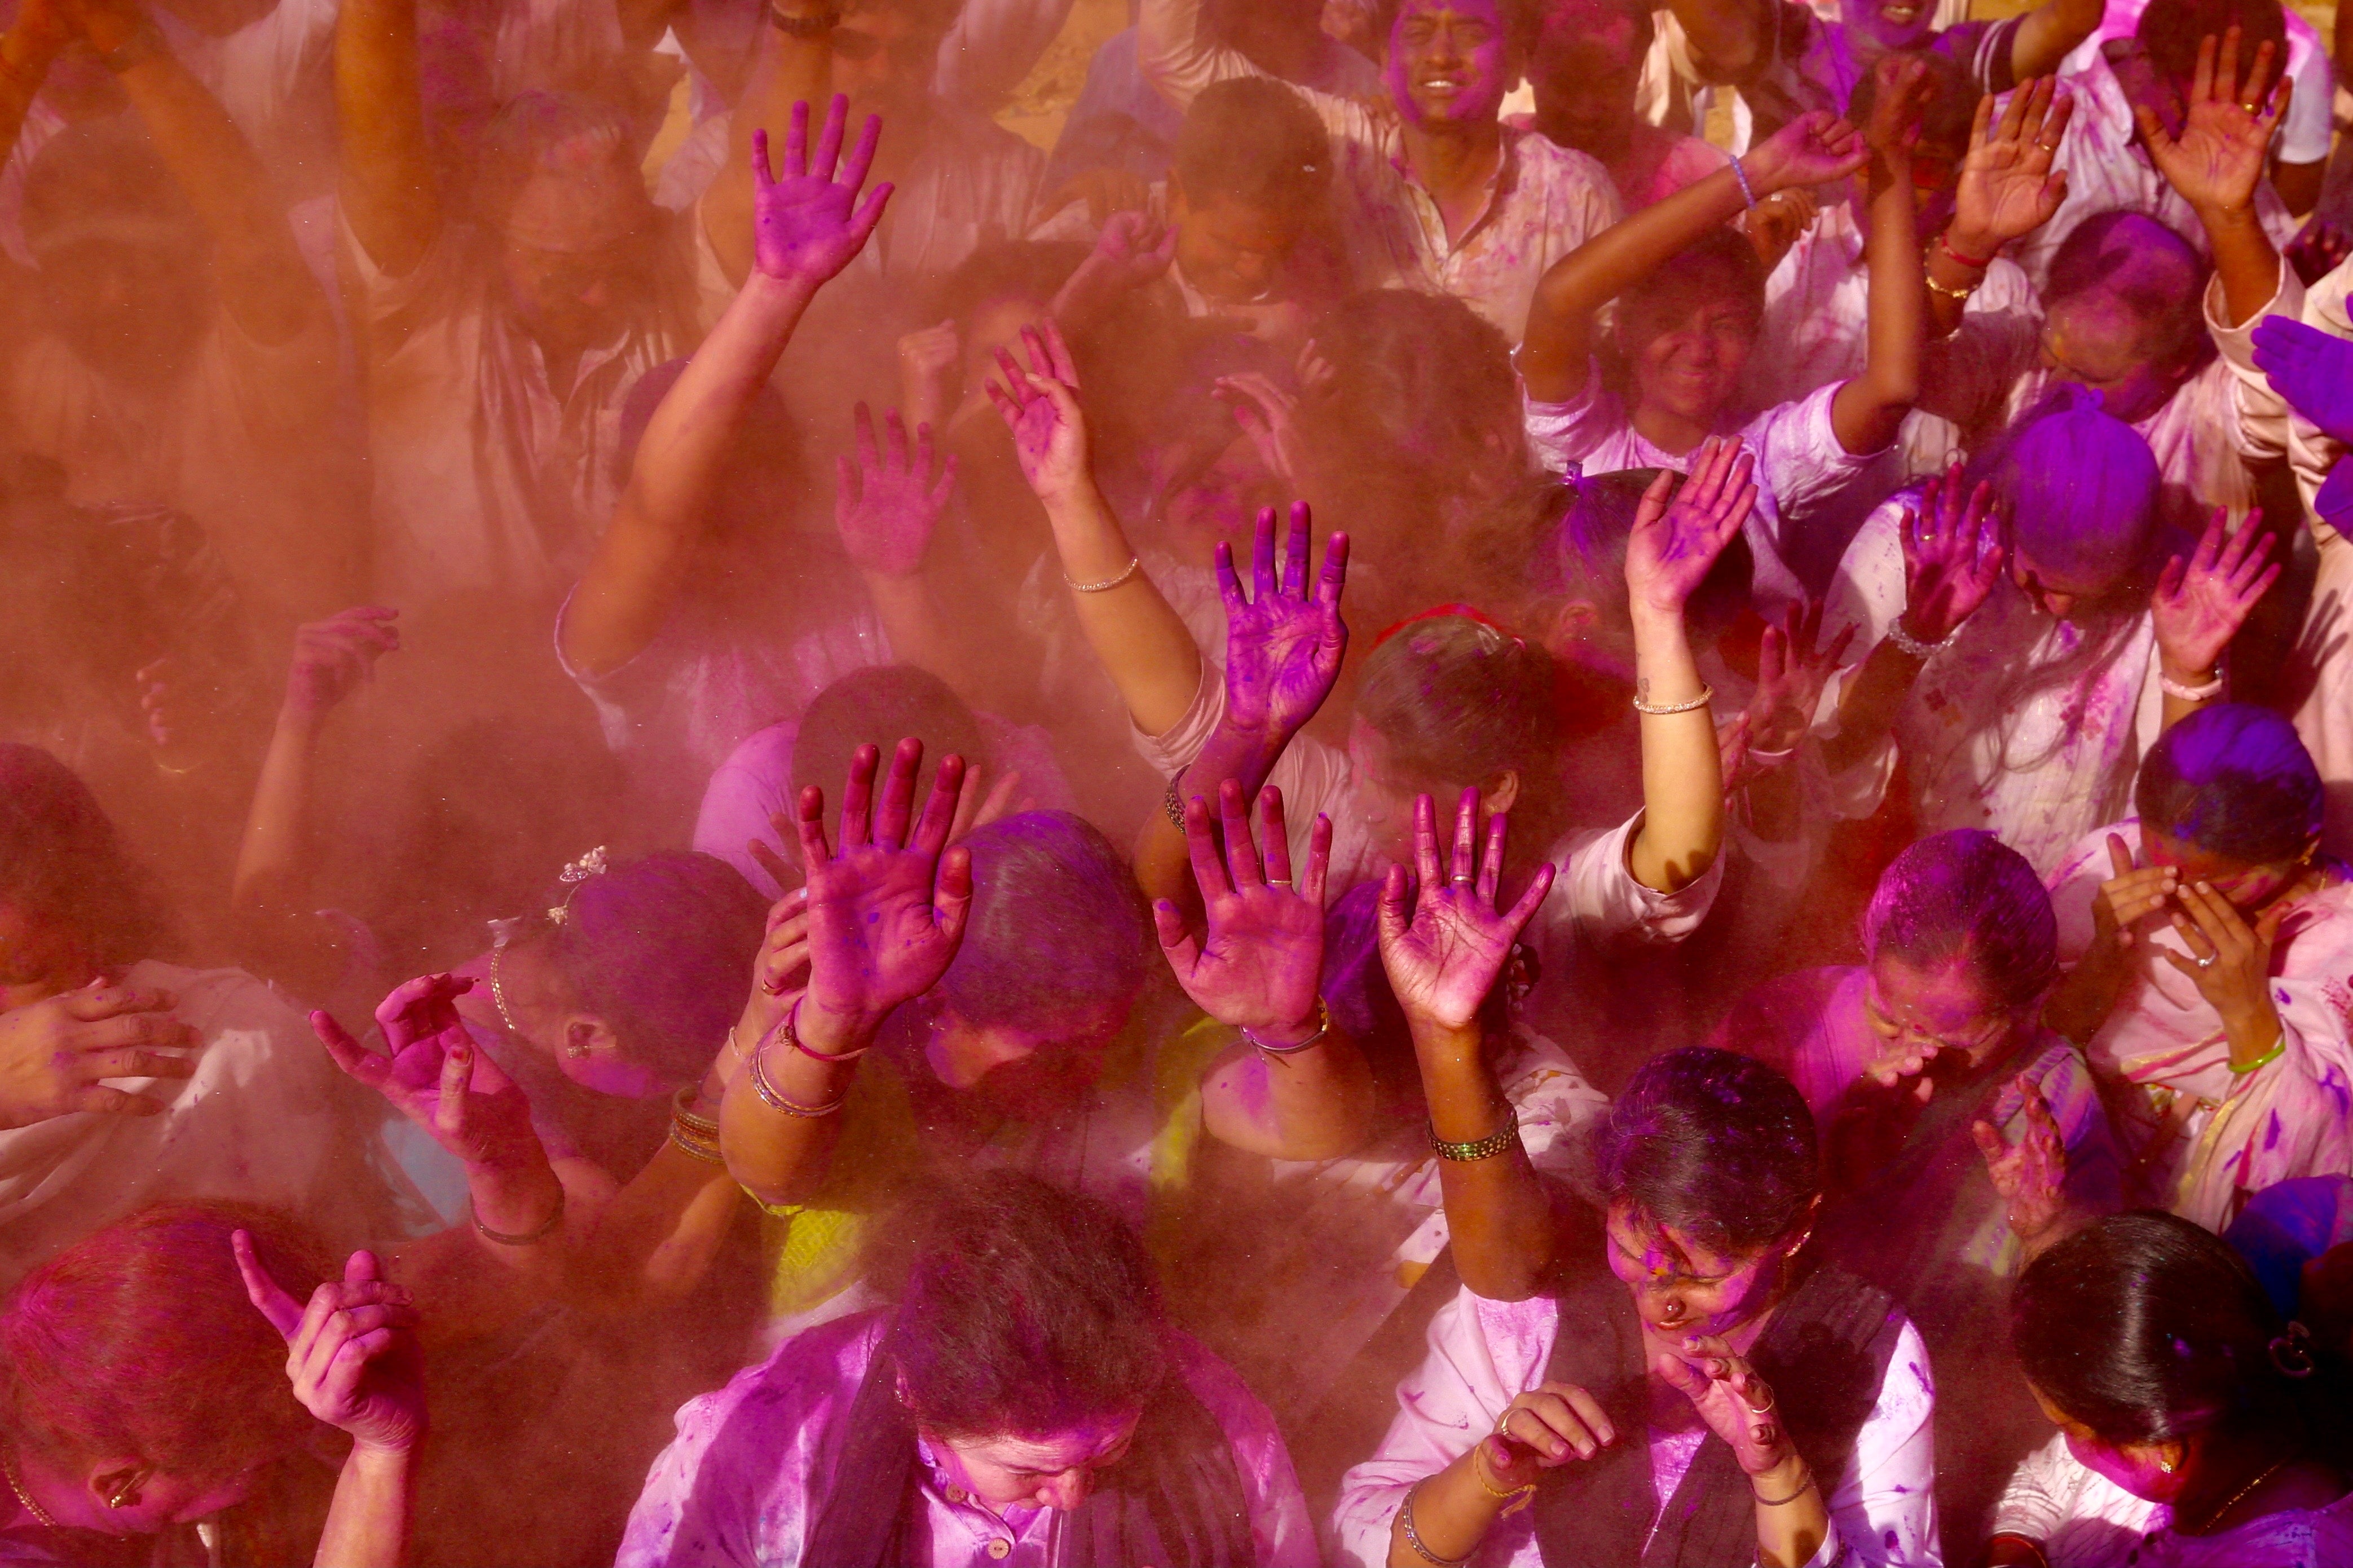 People covered with colored powder take part in the Holi festival celebrations in Bangalore